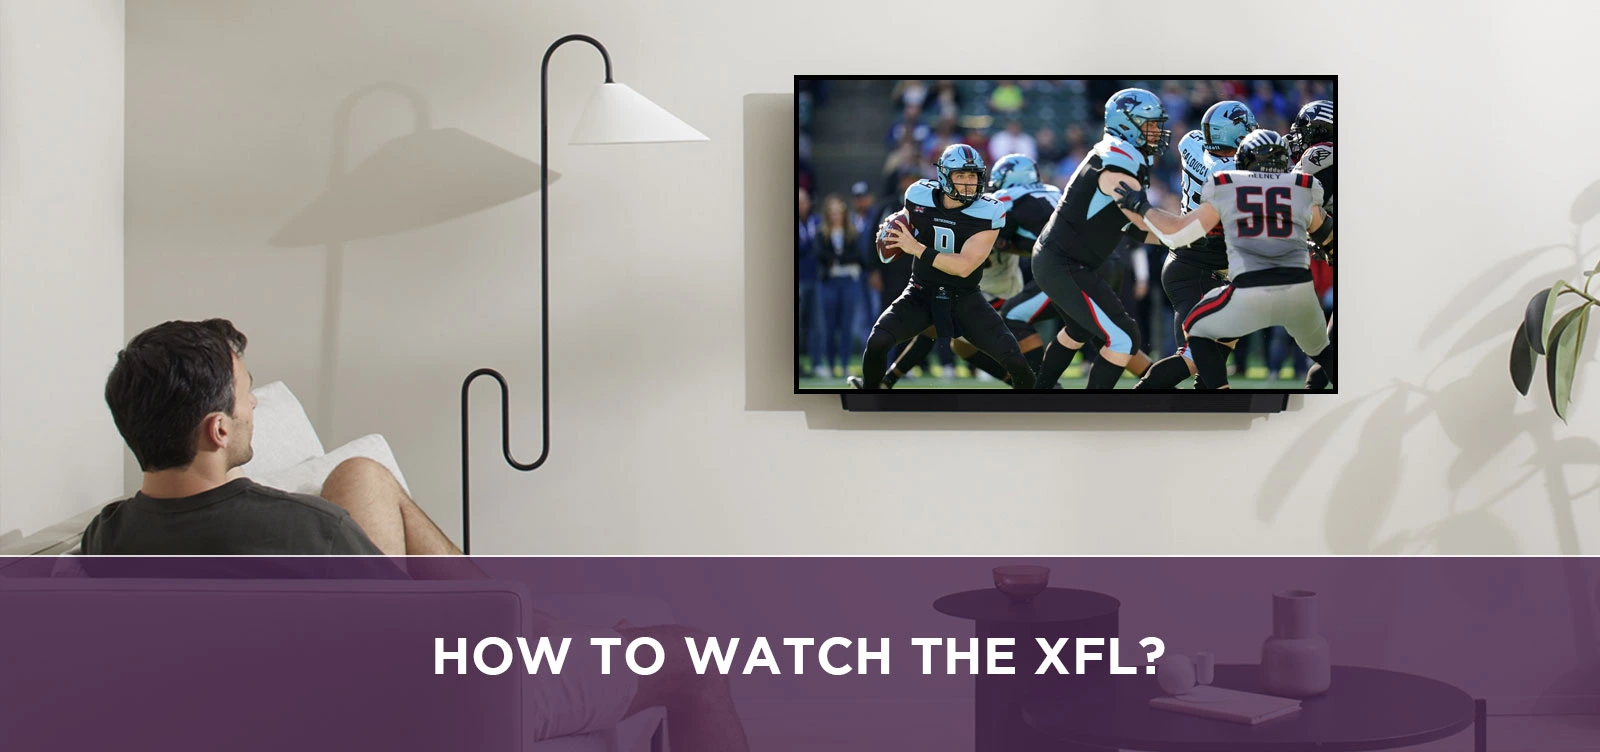 How To Watch the XFL?